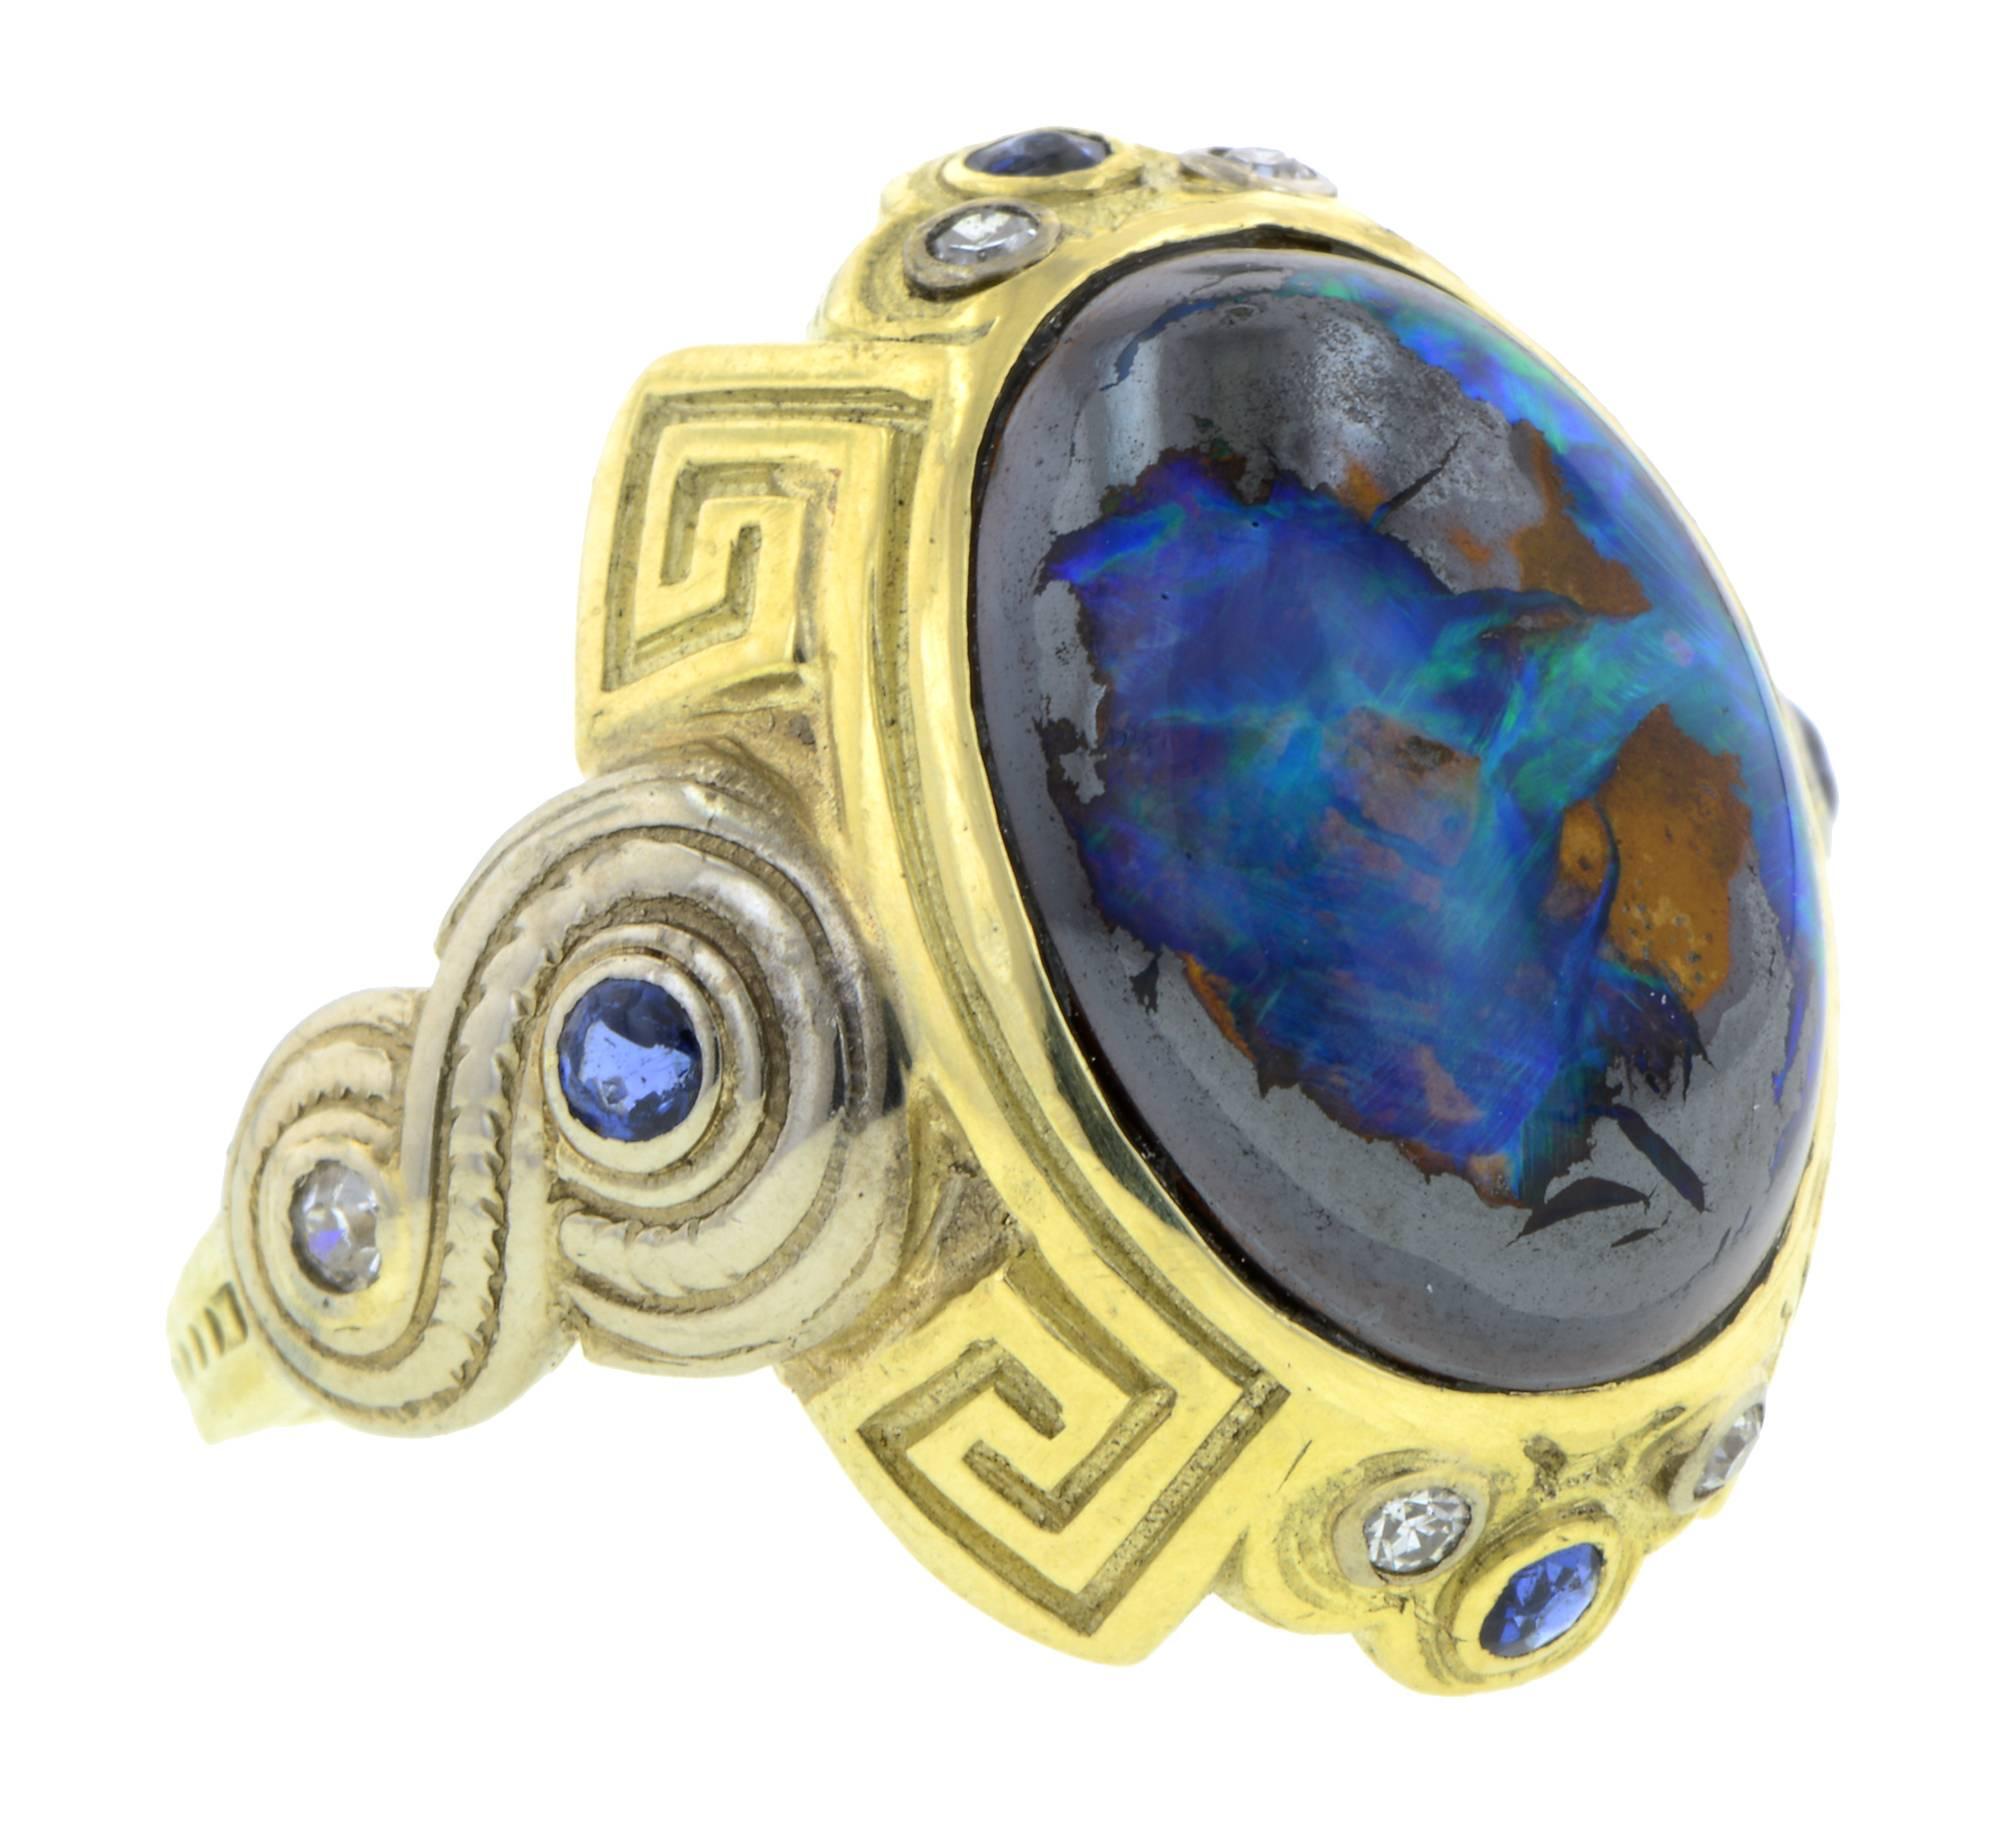 Art Deco Boulder Opal, Sapphire & Diamond Ring centering an oval boulder opal measuring app. 15.2 x 11.4mm, framed and flanked by four sapphires measuring app. 1.5 - 2.0mm and six diamonds (5 Single cut, 1 Round Brilliant cut) weighing app.